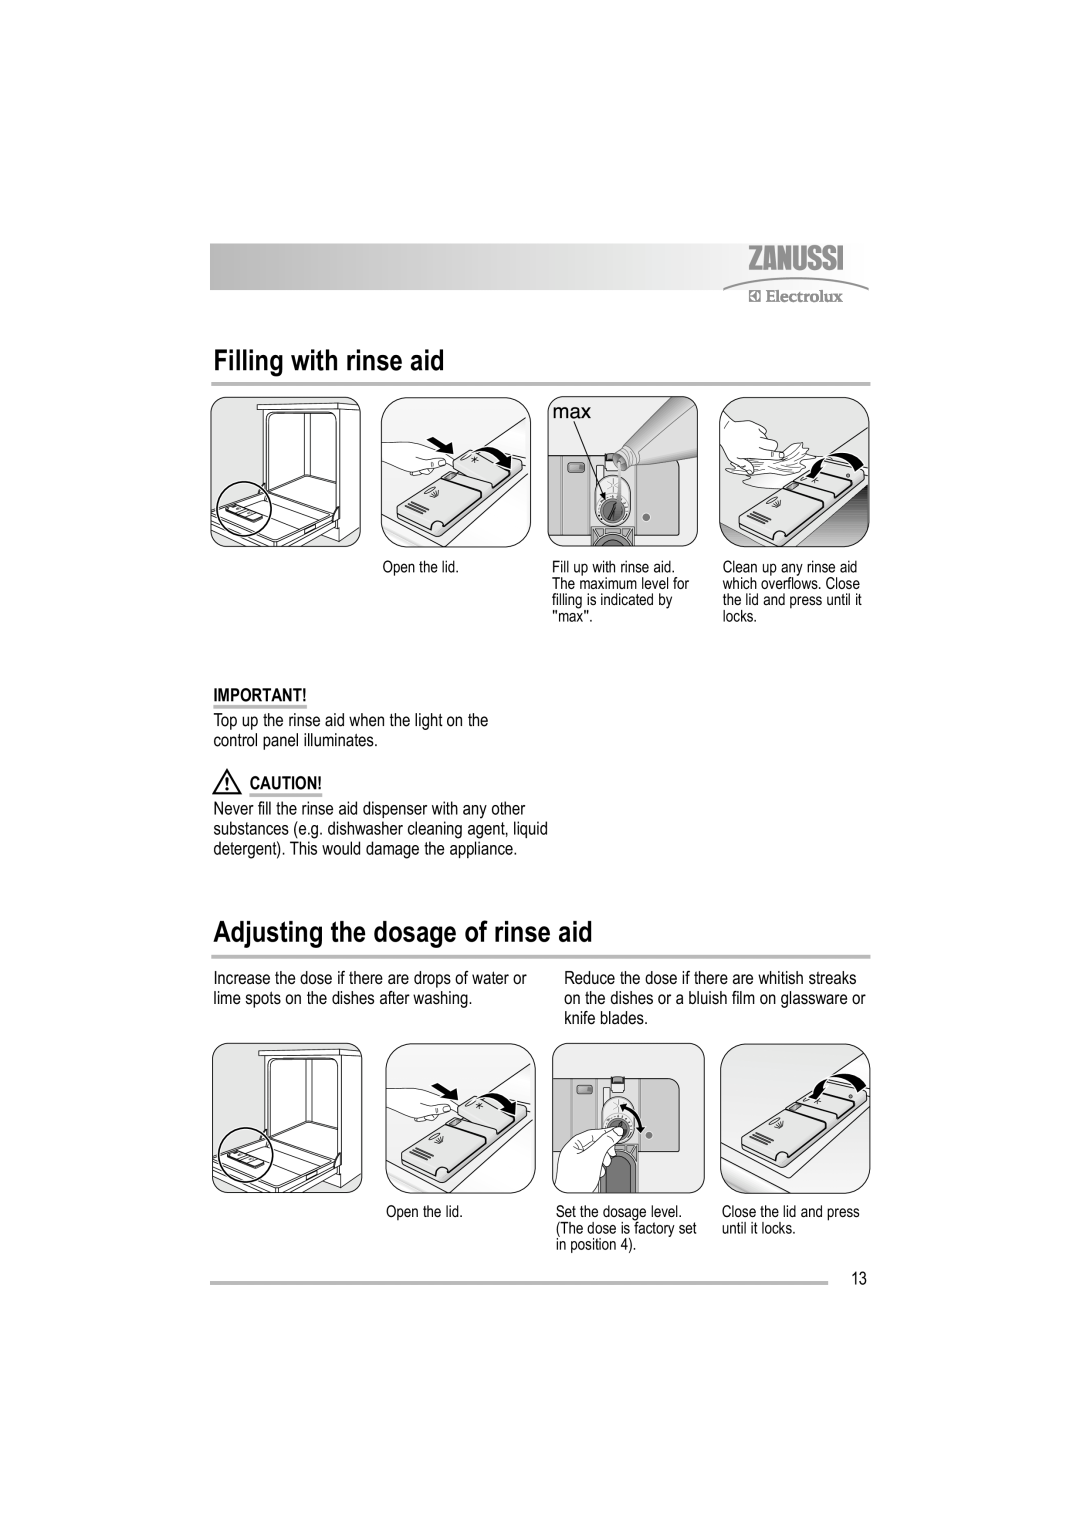 Electrolux ZDF 501 user manual Filling with rinse aid, Adjusting the dosage of rinse aid 